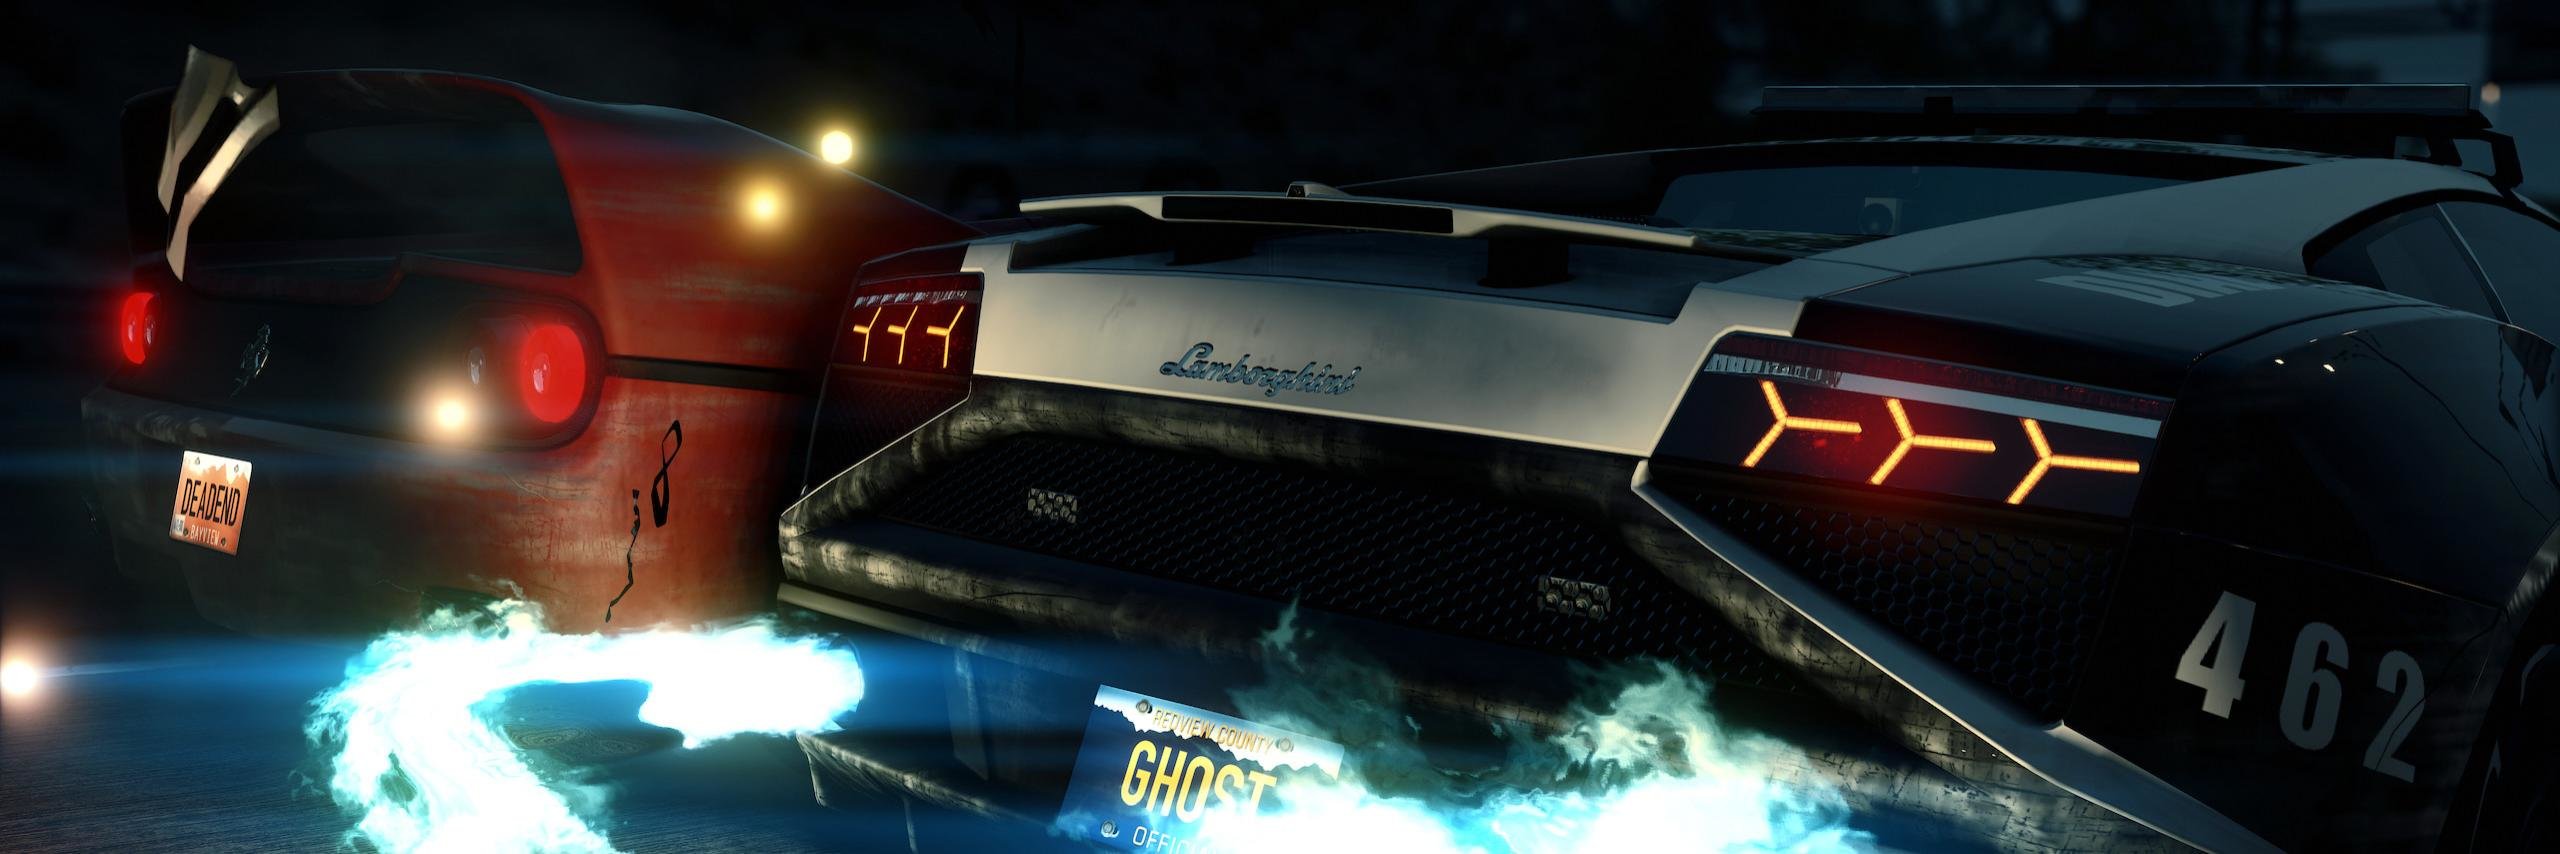 Best Need For Speed: Rivals wallpaper ID:259507 for High Resolution dual screen 2560x854 PC